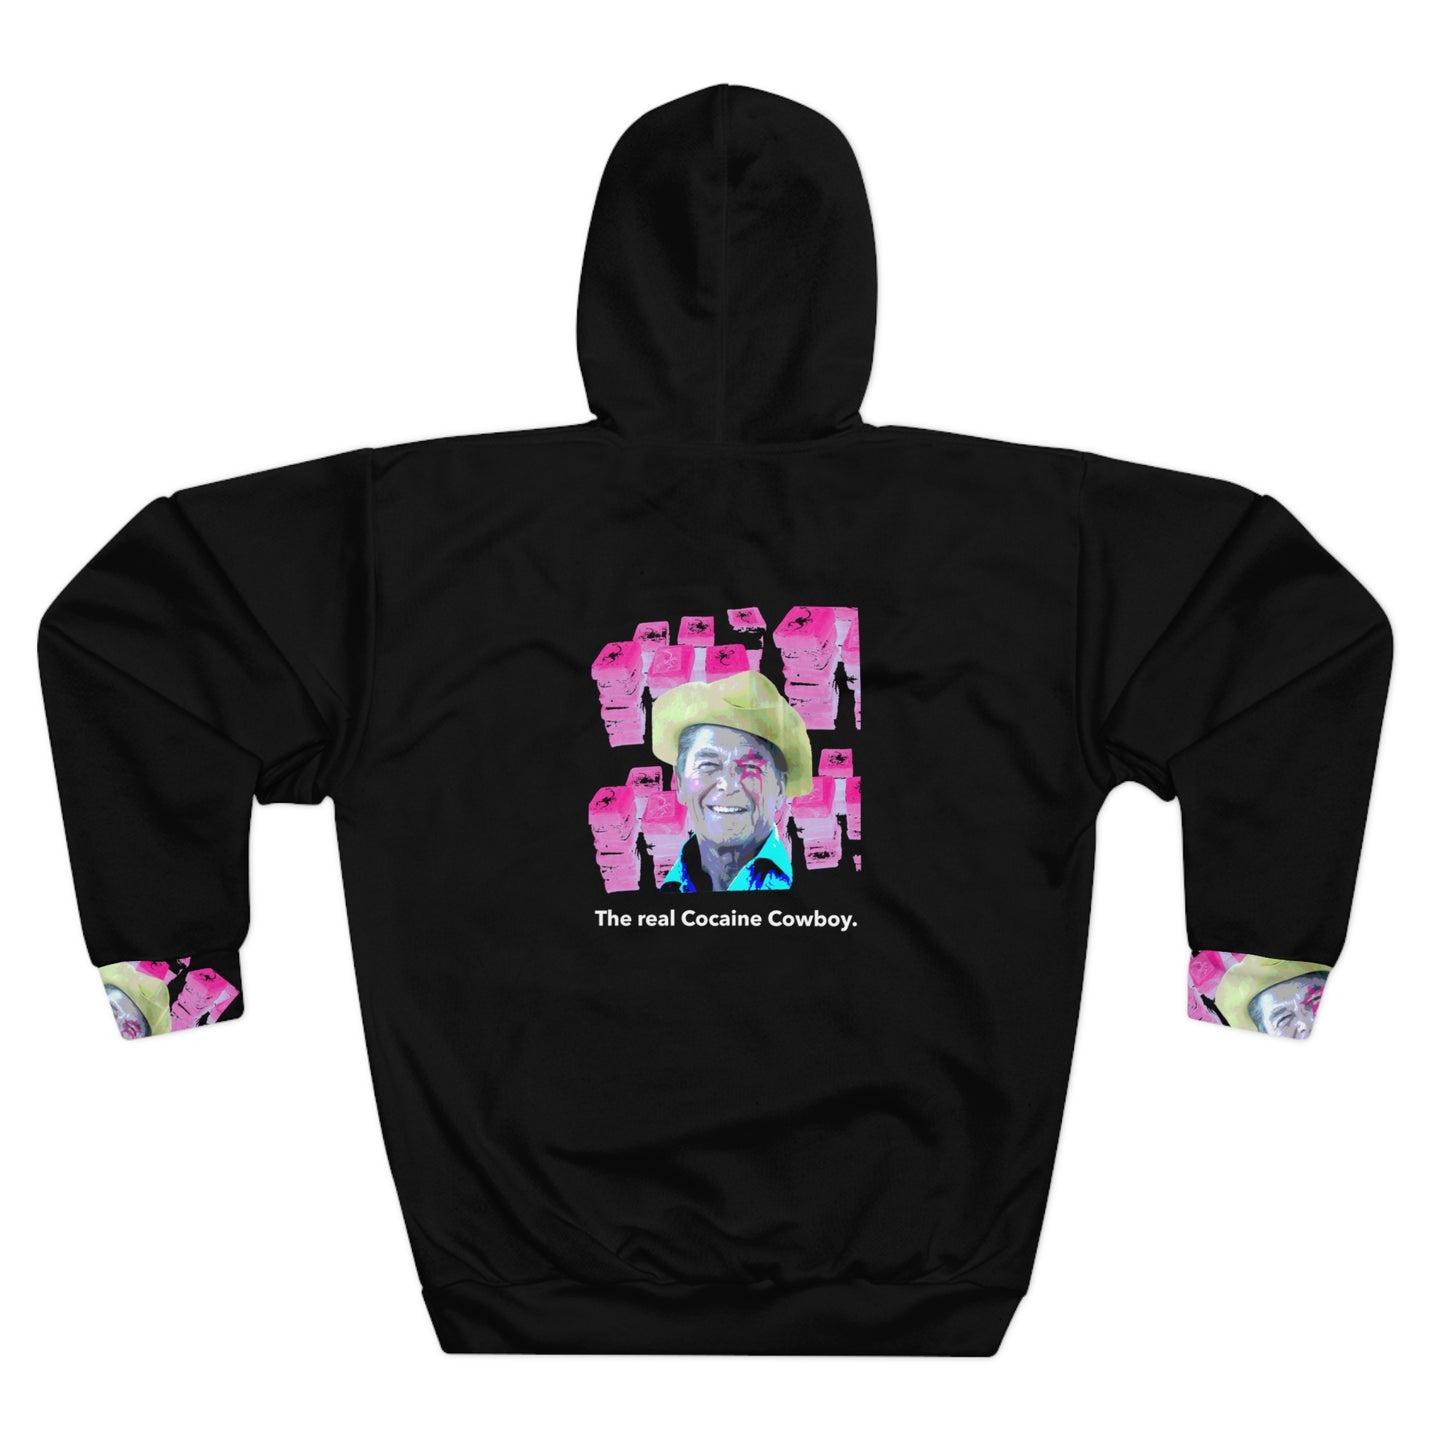 The Real Cocaine Cowboy, Premium Blend Hoodie